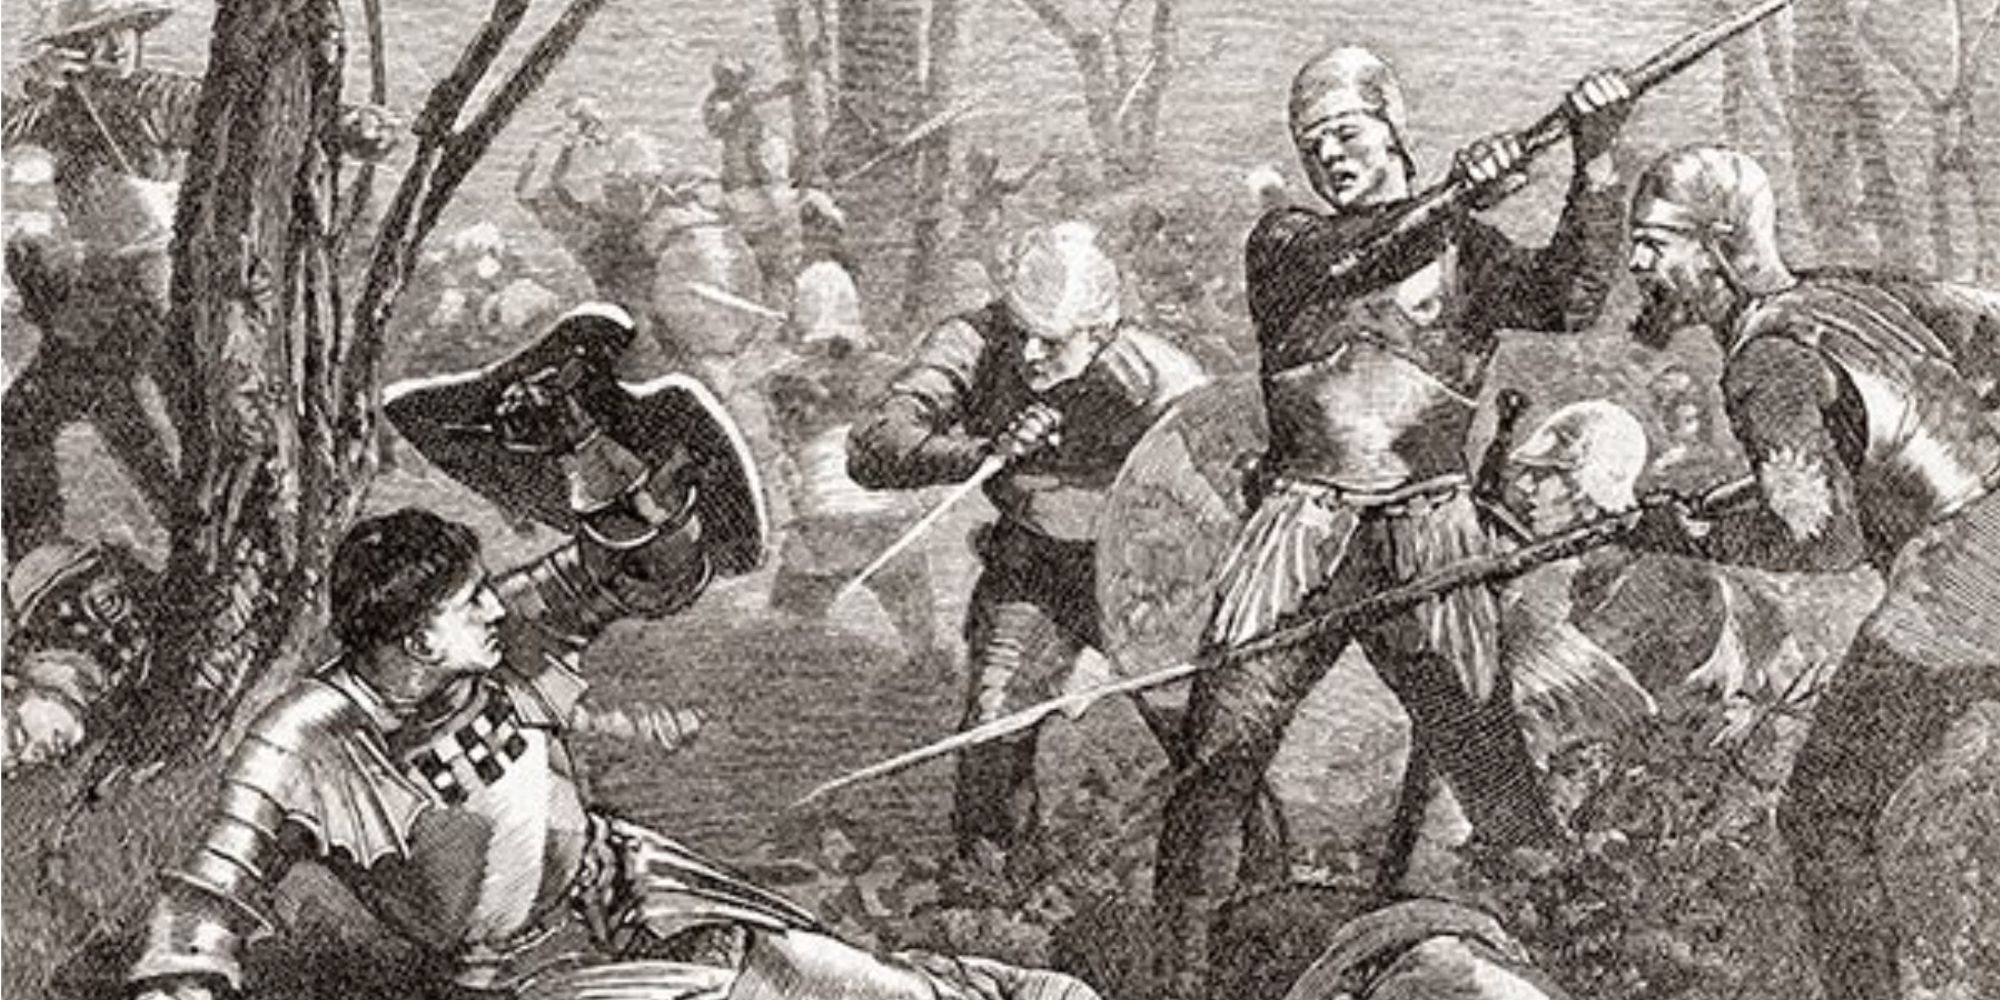 An artist's depiction of the death of Richard Neville the Kingmaker, who potentially inspired House of the Dragon's Criston Cole.